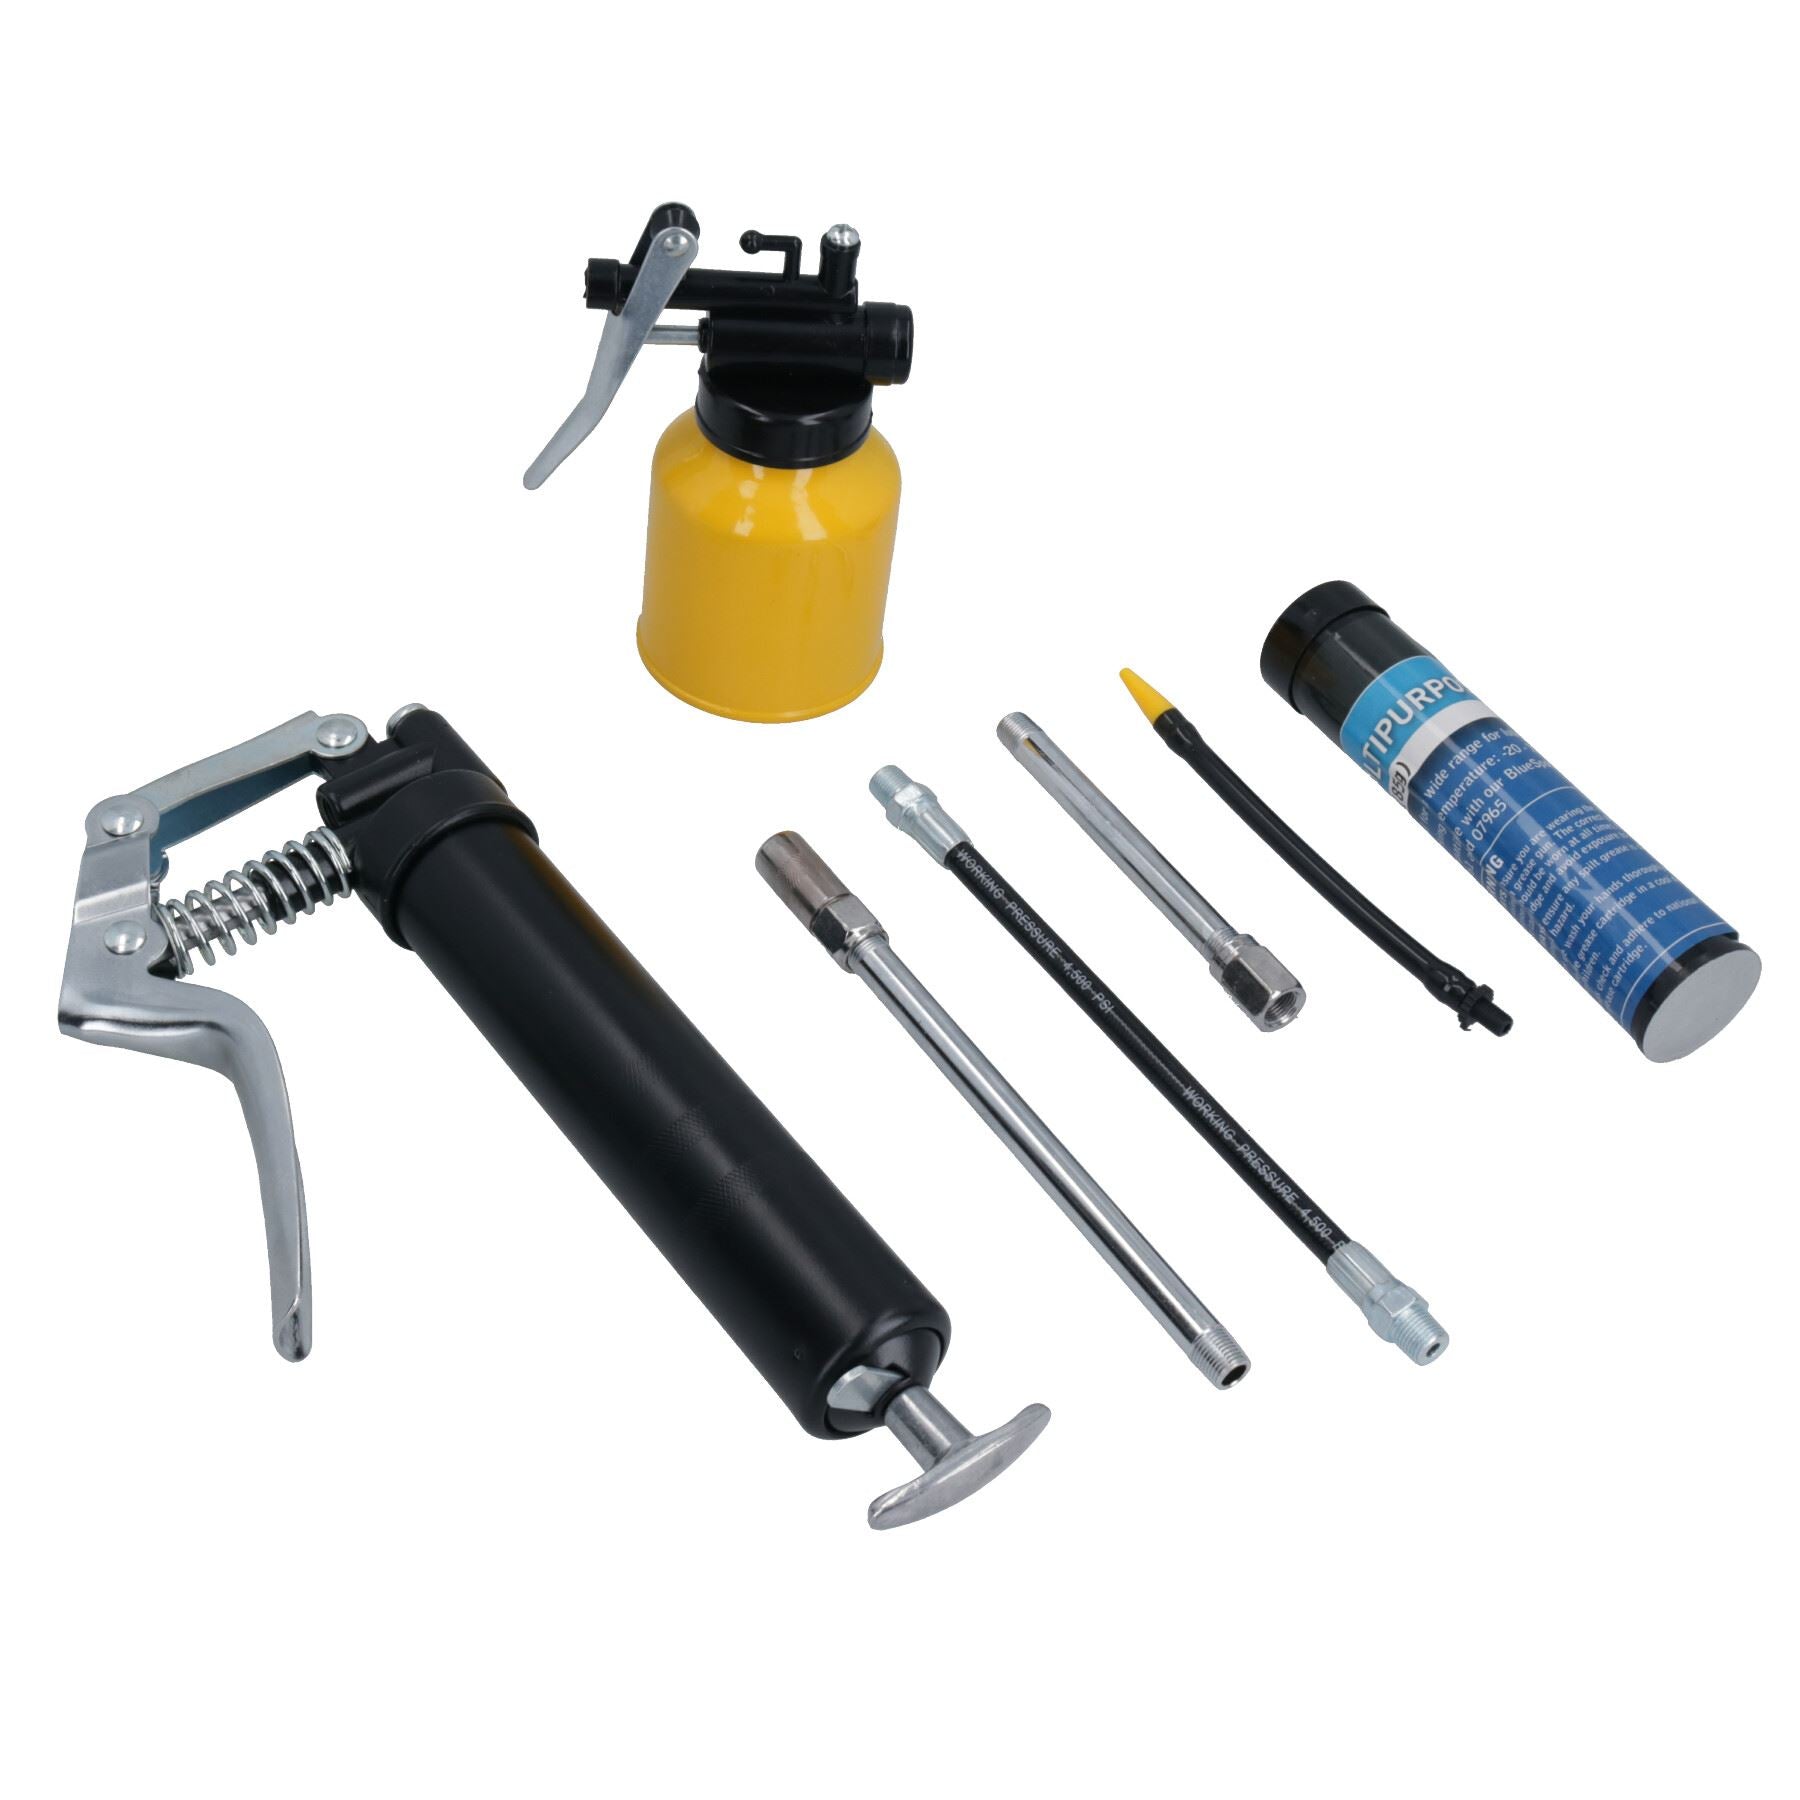 Manual Pistol Grip Grease Gun 120cc Cartridge with Grease + Oil Can 2pc Set